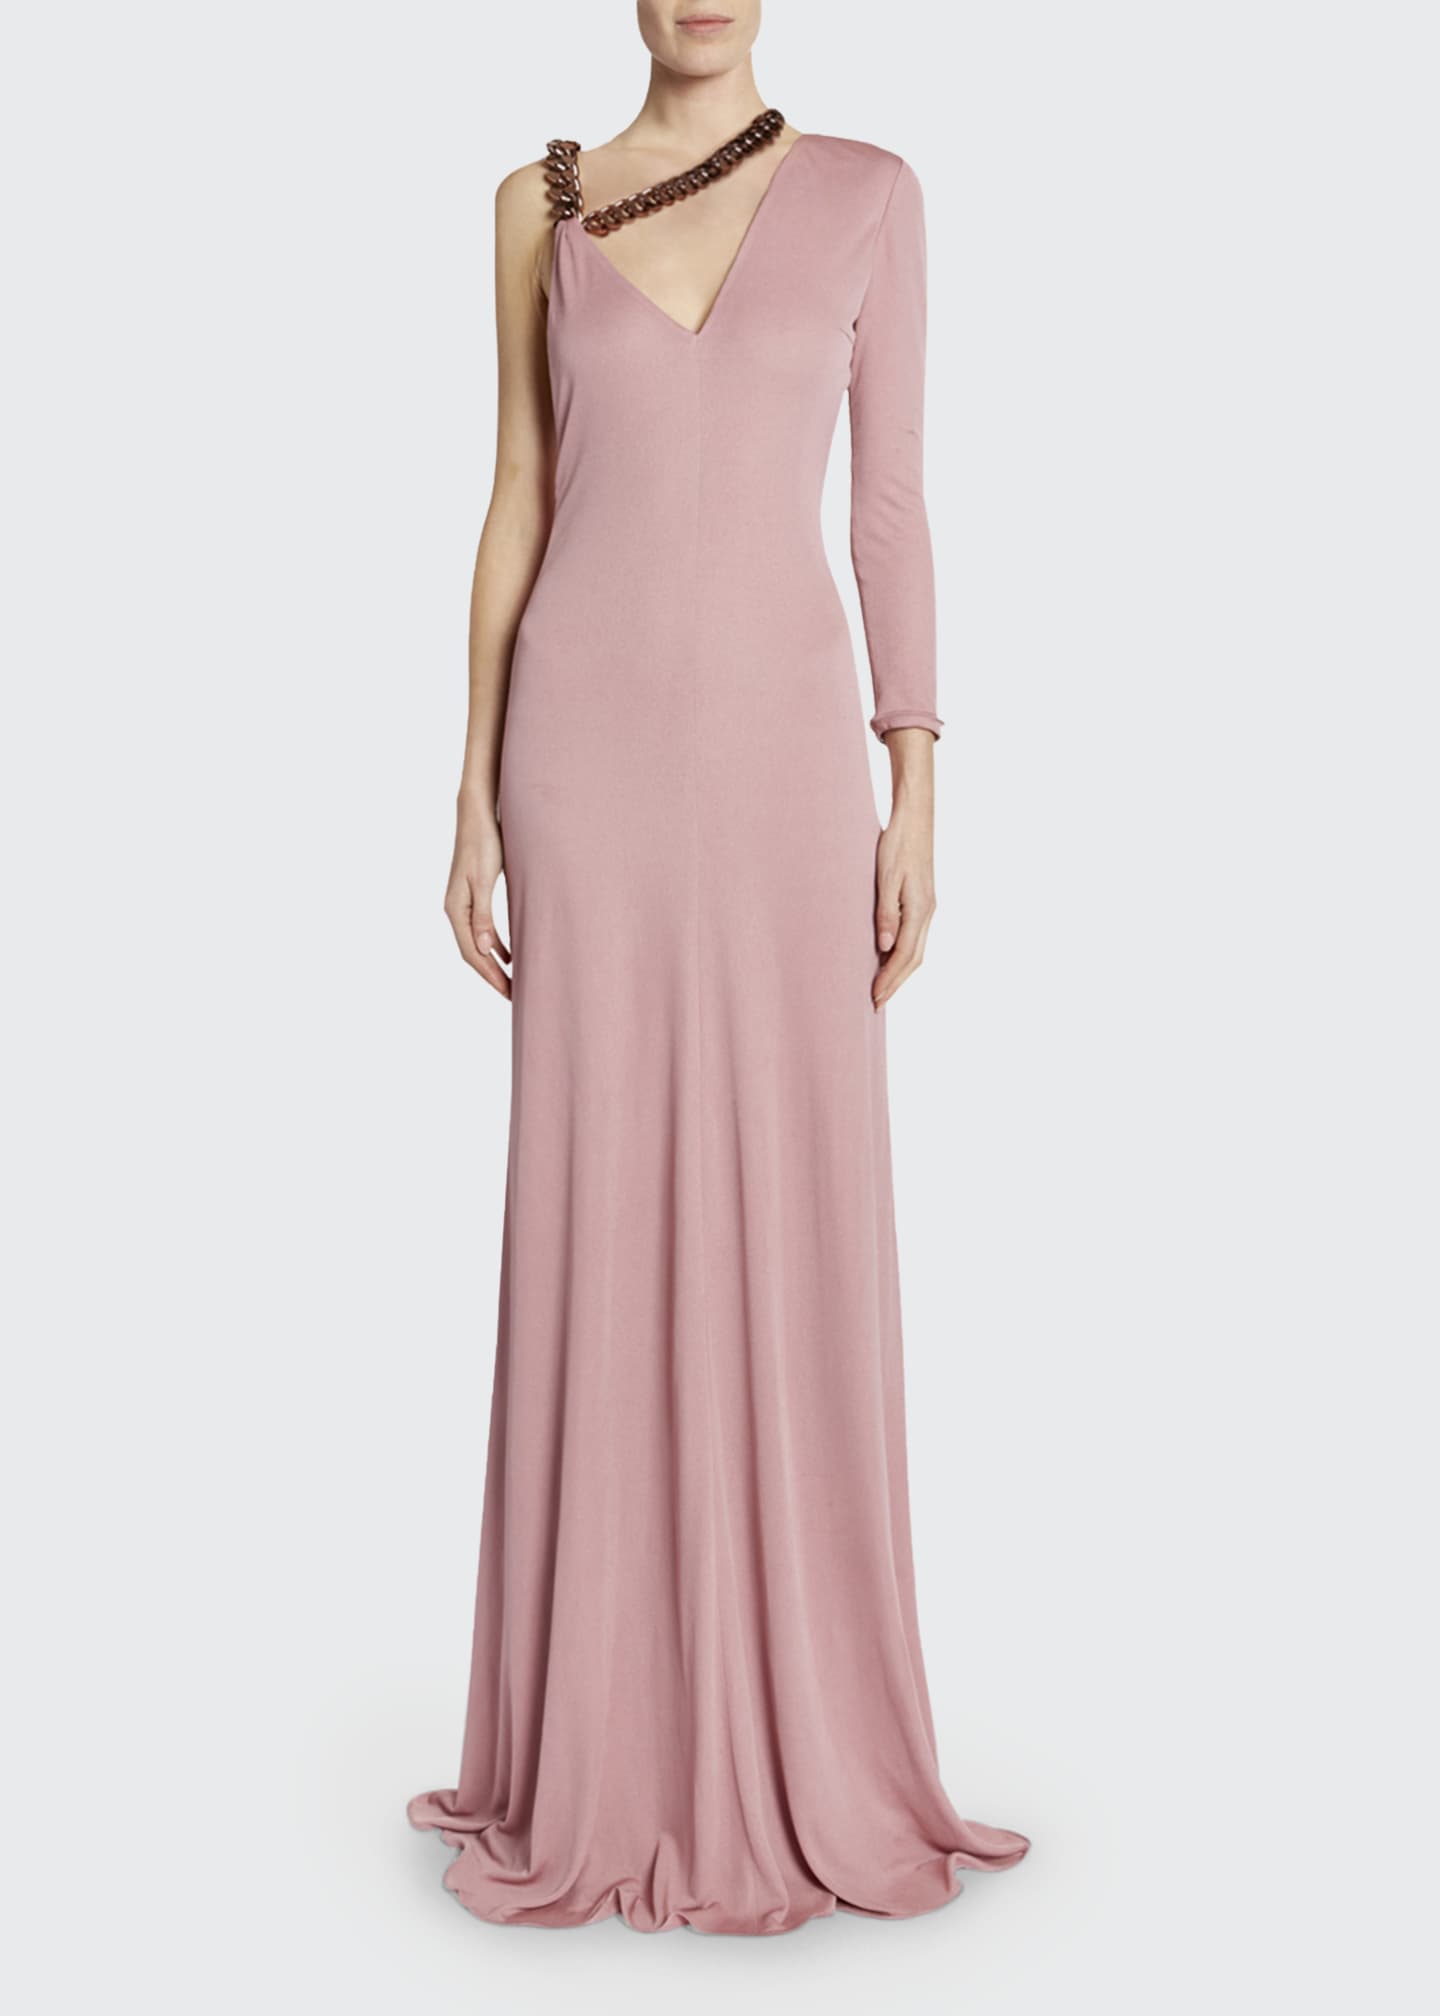 TOM FORD One-Sleeve Chain-Strap Jersey Gown - Bergdorf Goodman